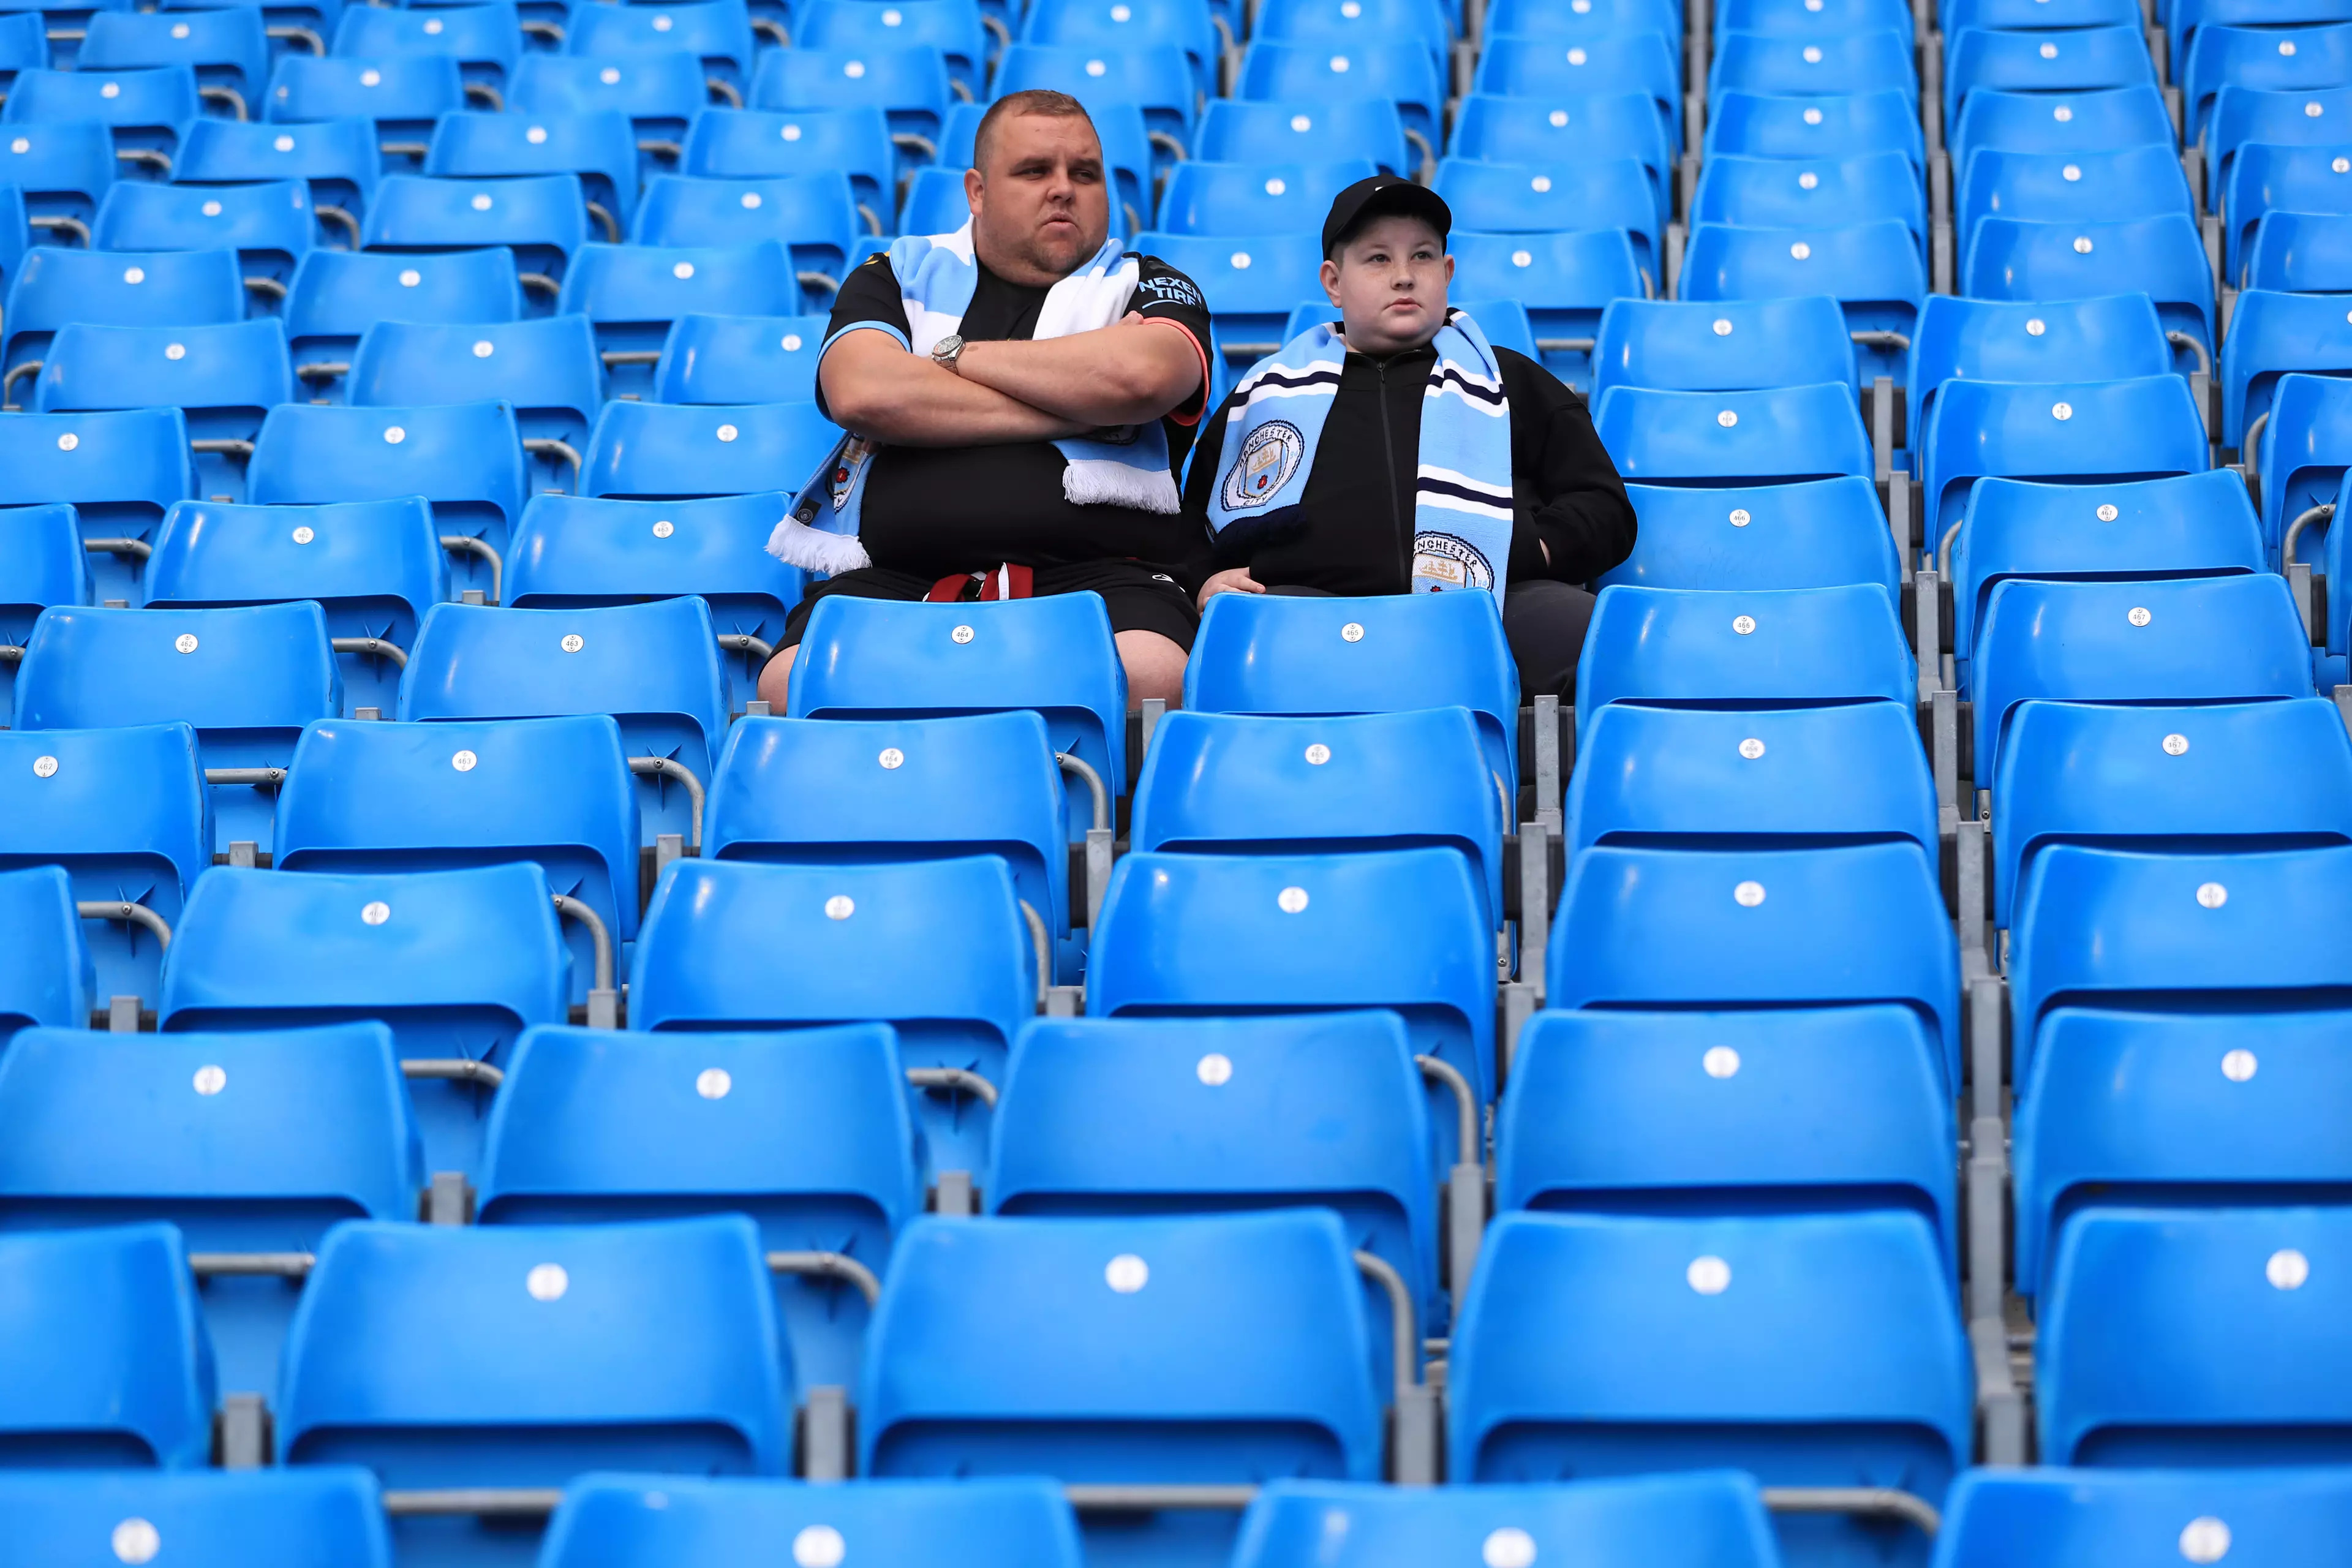 A busy Champions League night at the Etihad. Image: PA Images